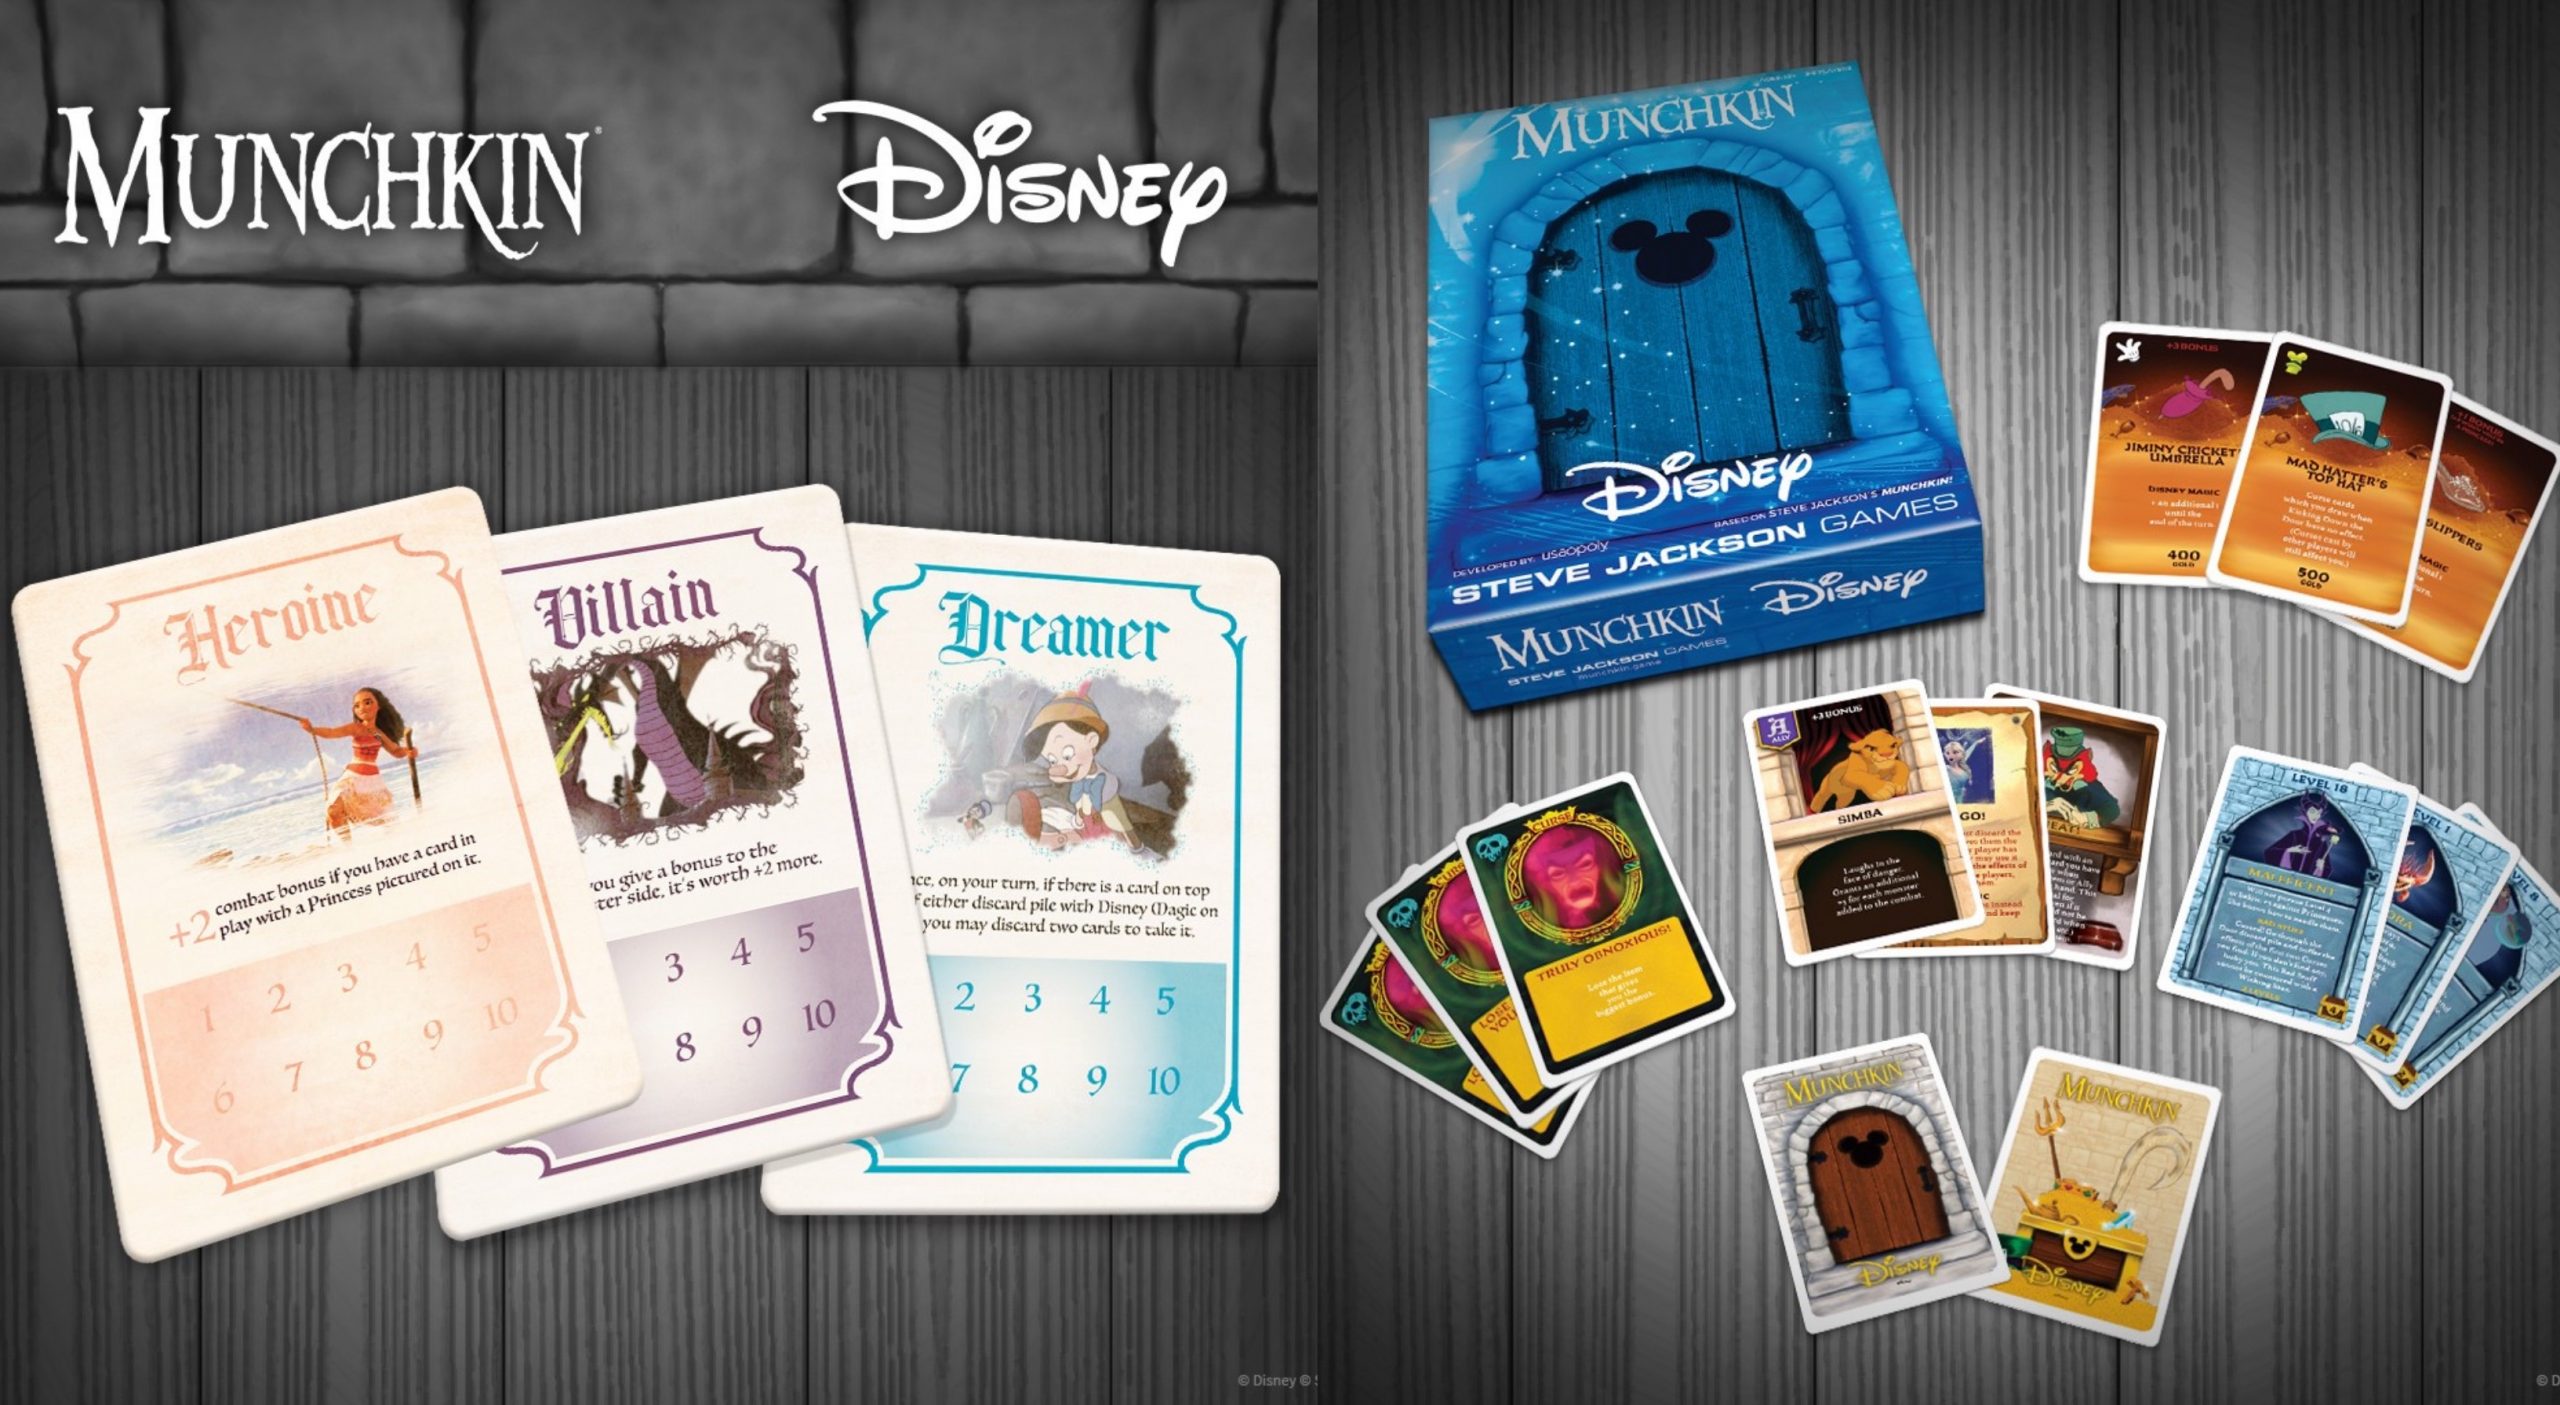 Disney Munchkin To Be Released in Fall 2020